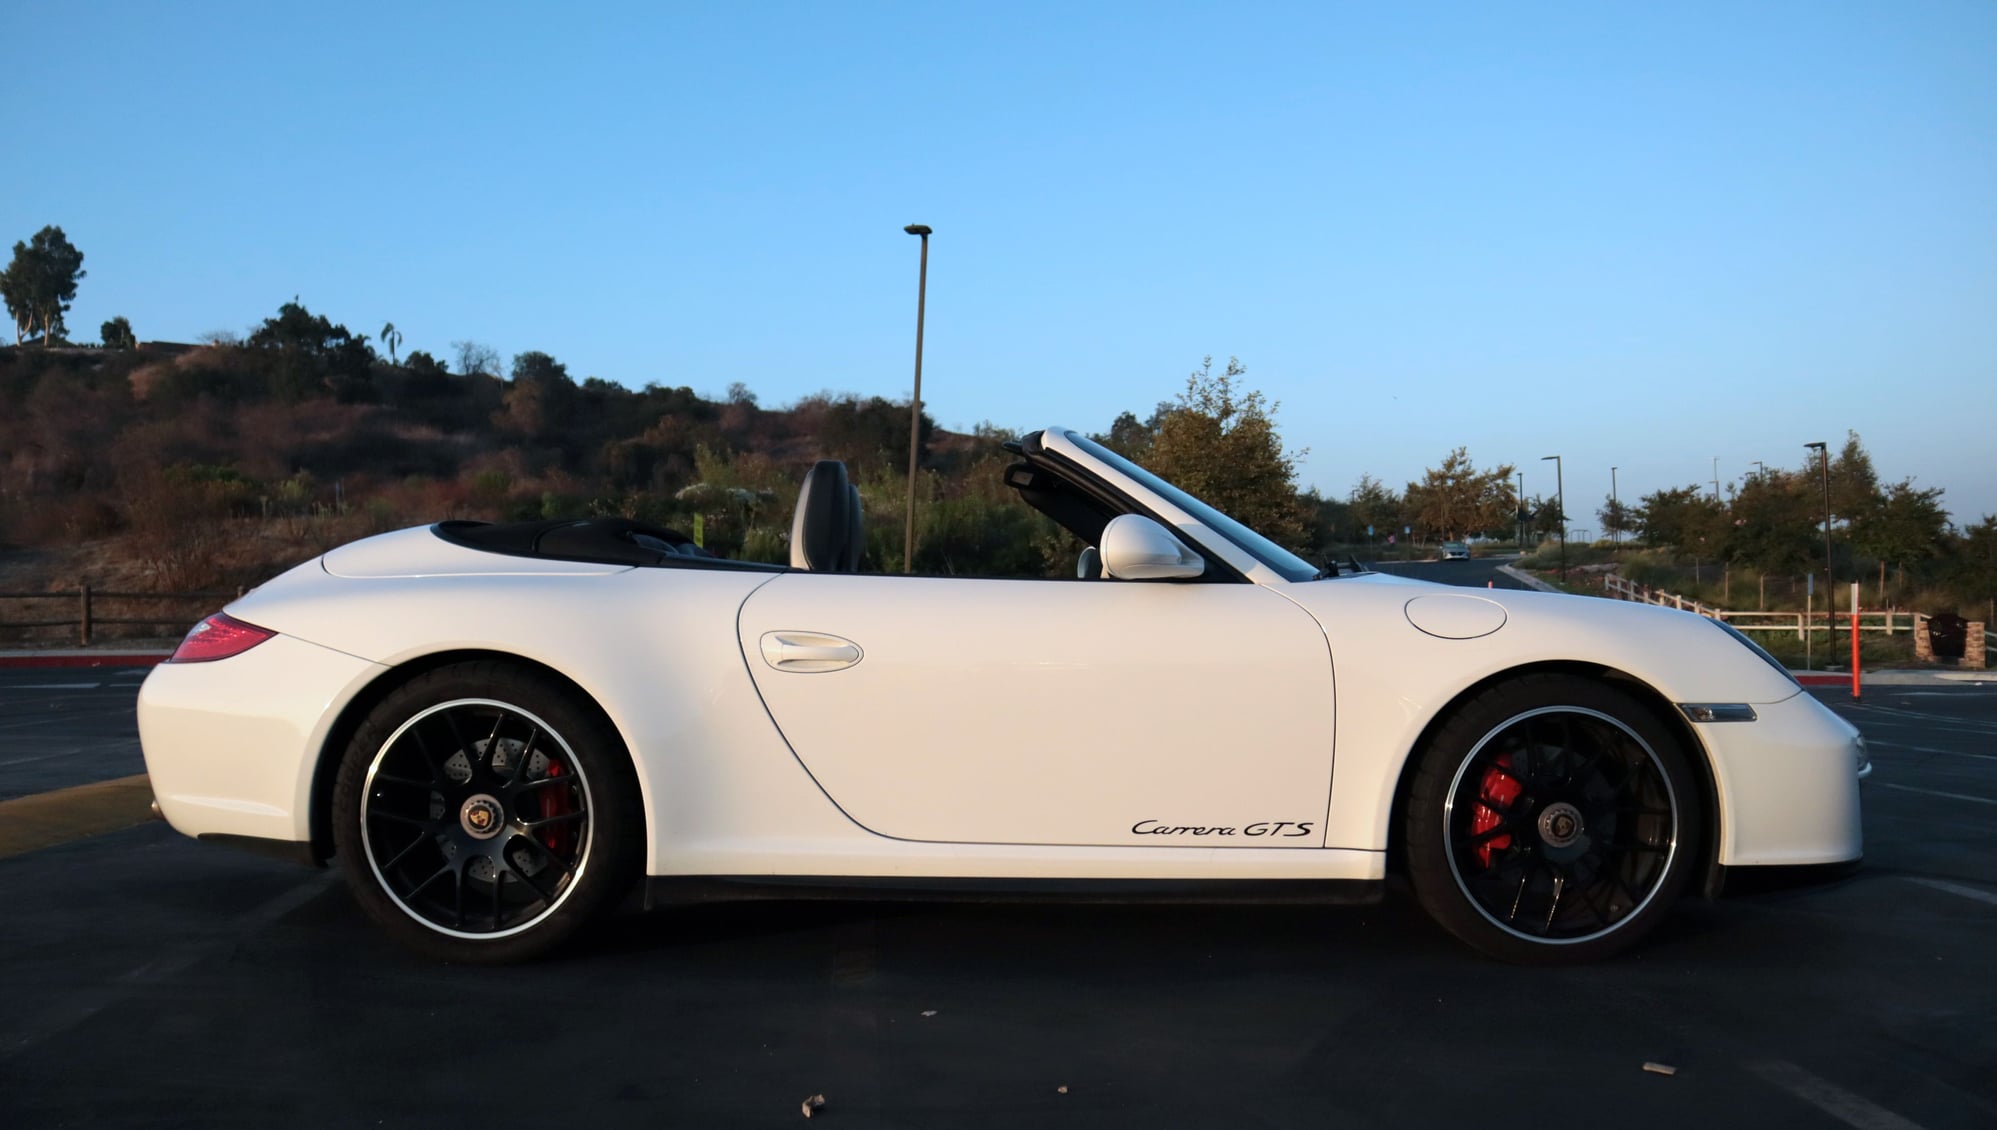 2011 Porsche 911 - 2011 Porsche 911 GTS cab PDK - Used - VIN WP0CB2A93BS754761 - 62,713 Miles - 6 cyl - 2WD - Automatic - Convertible - White - Los Angeles, CA 91789, United States